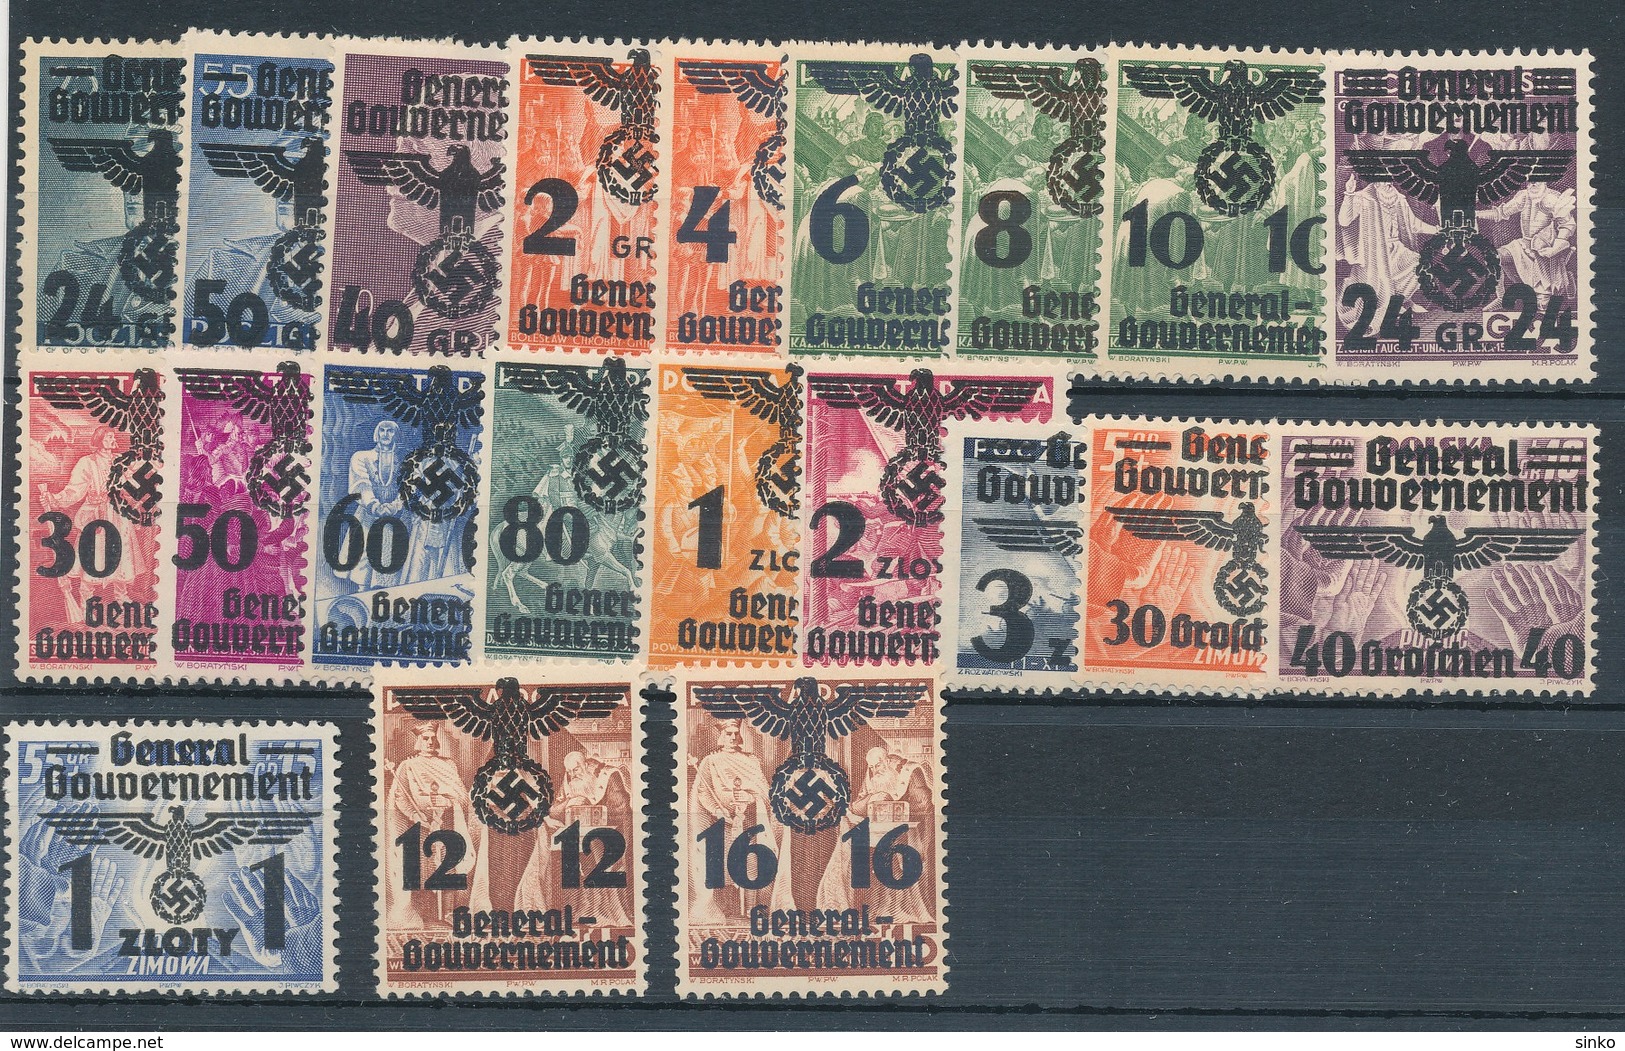 1940. General Government - German Empire - General Government